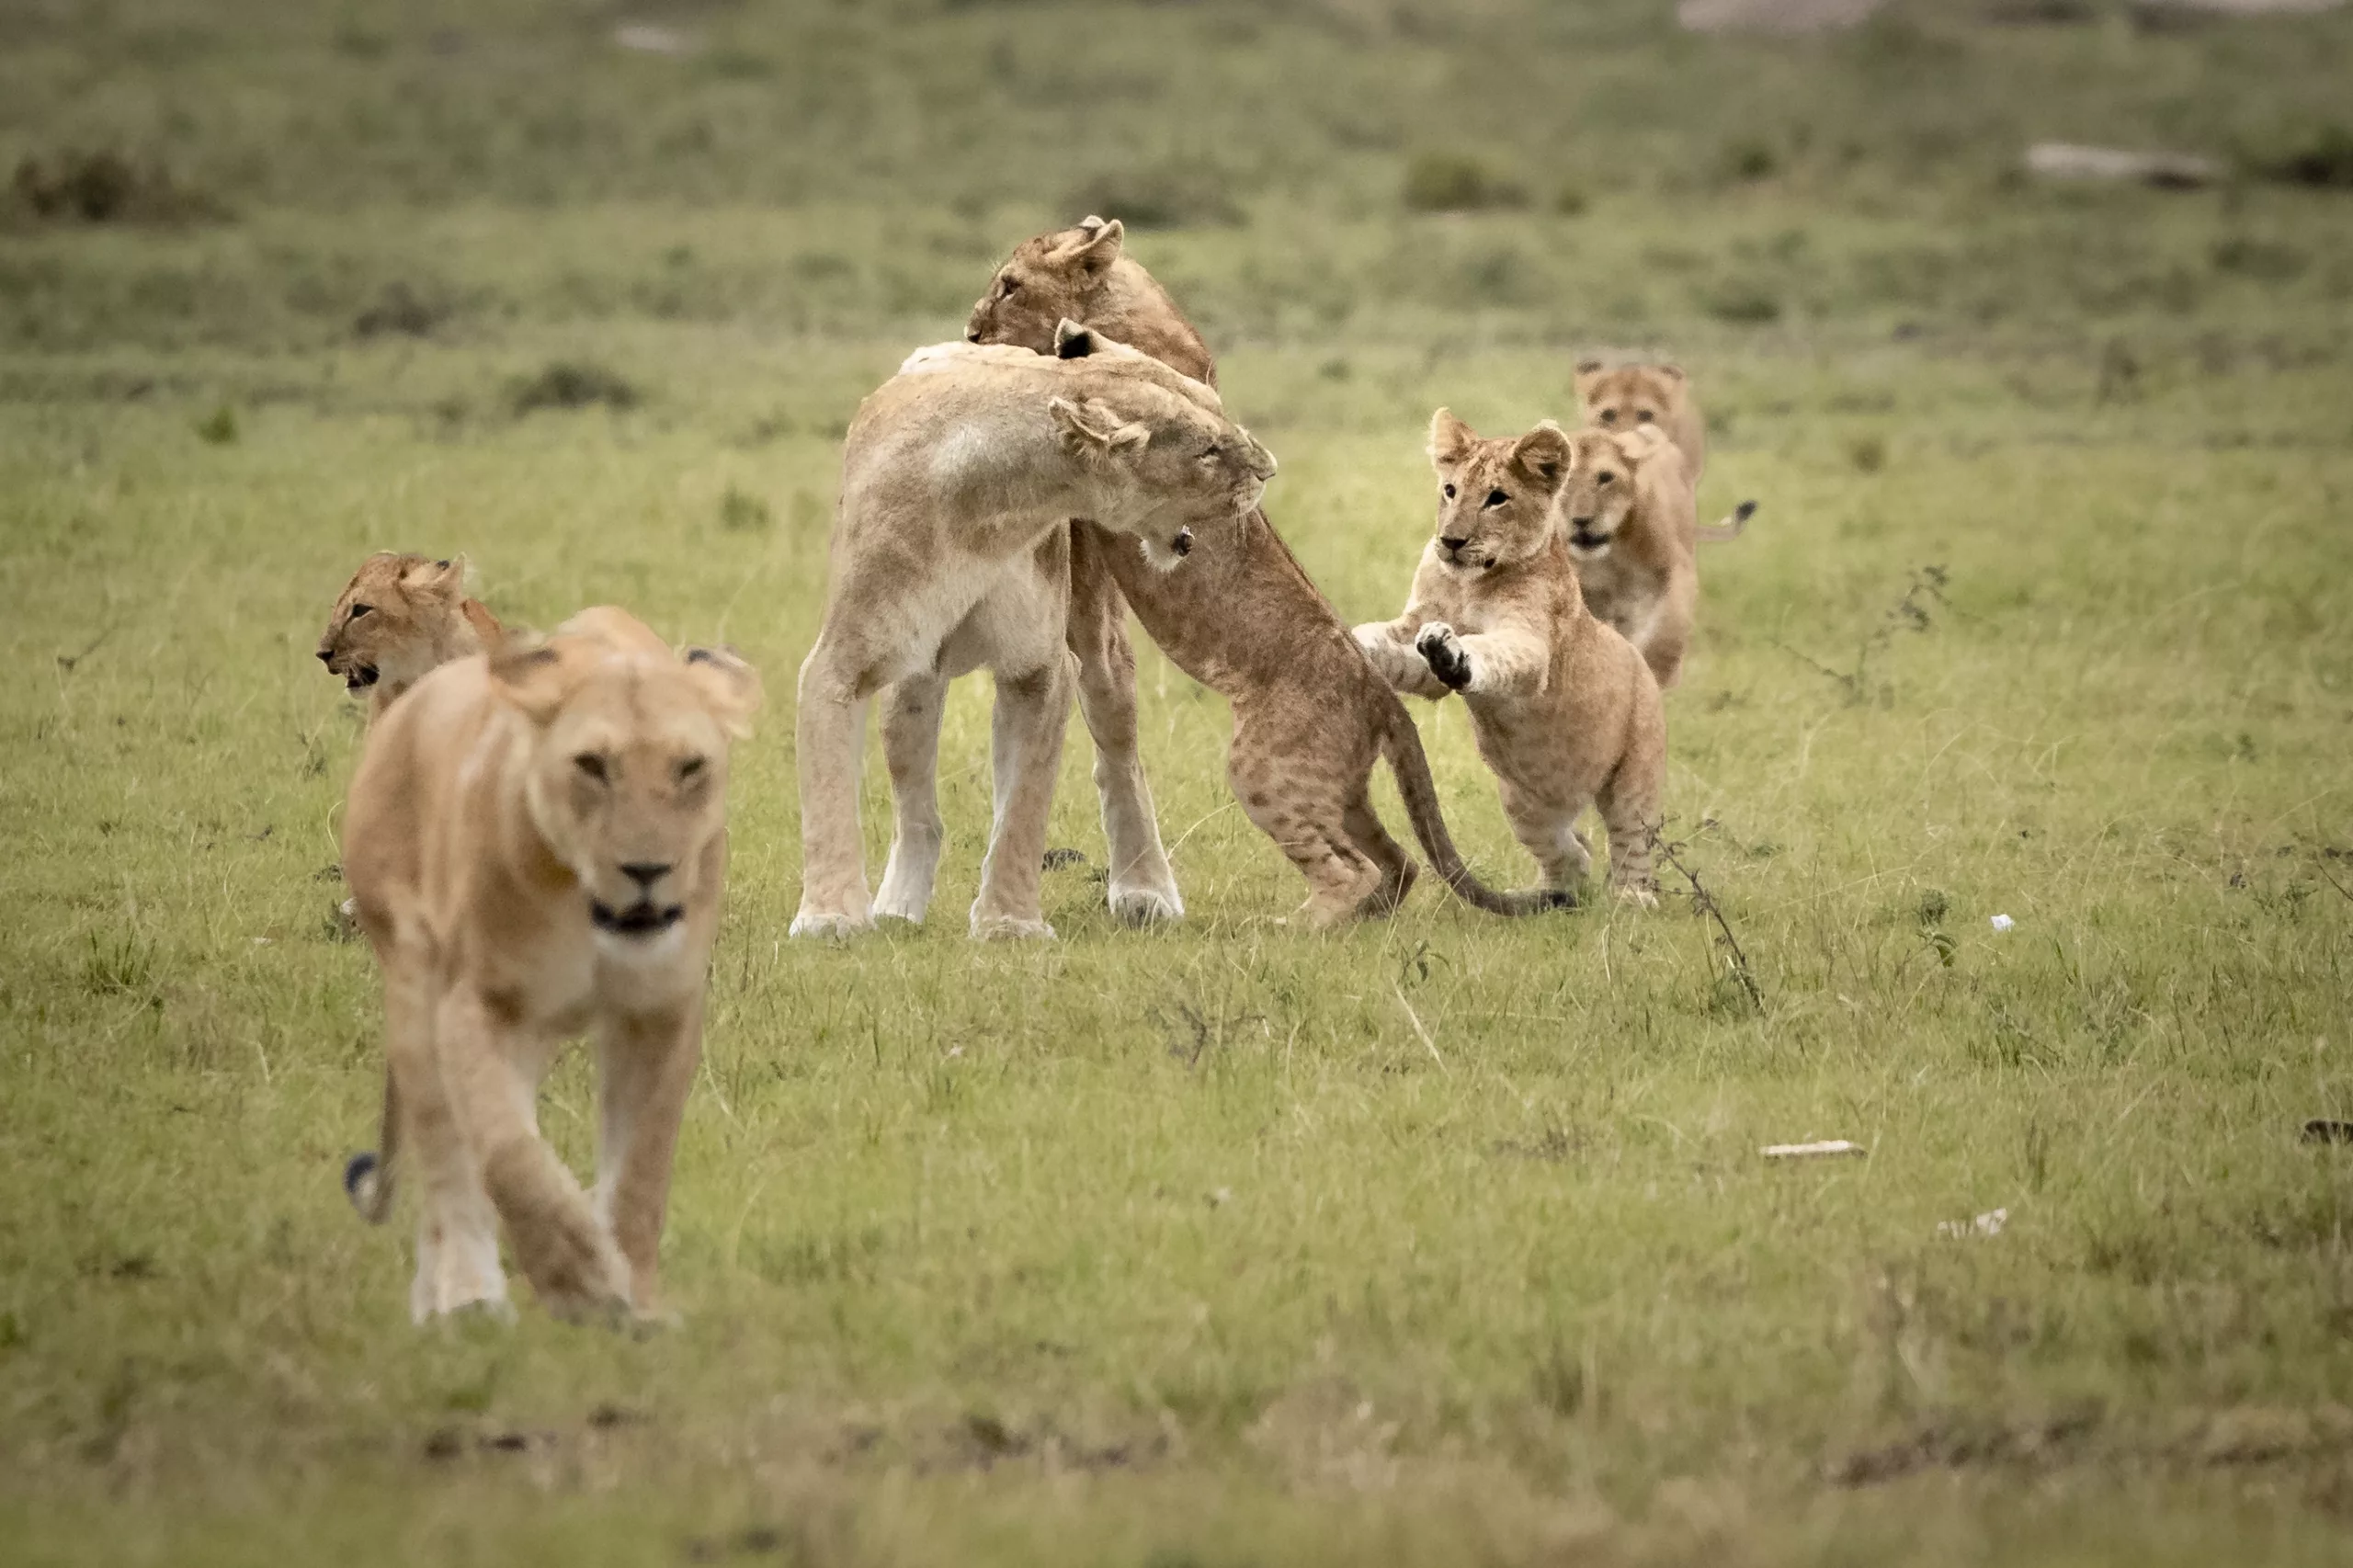 Cubs enjoying a play with the lionesses. © Janine Krayer